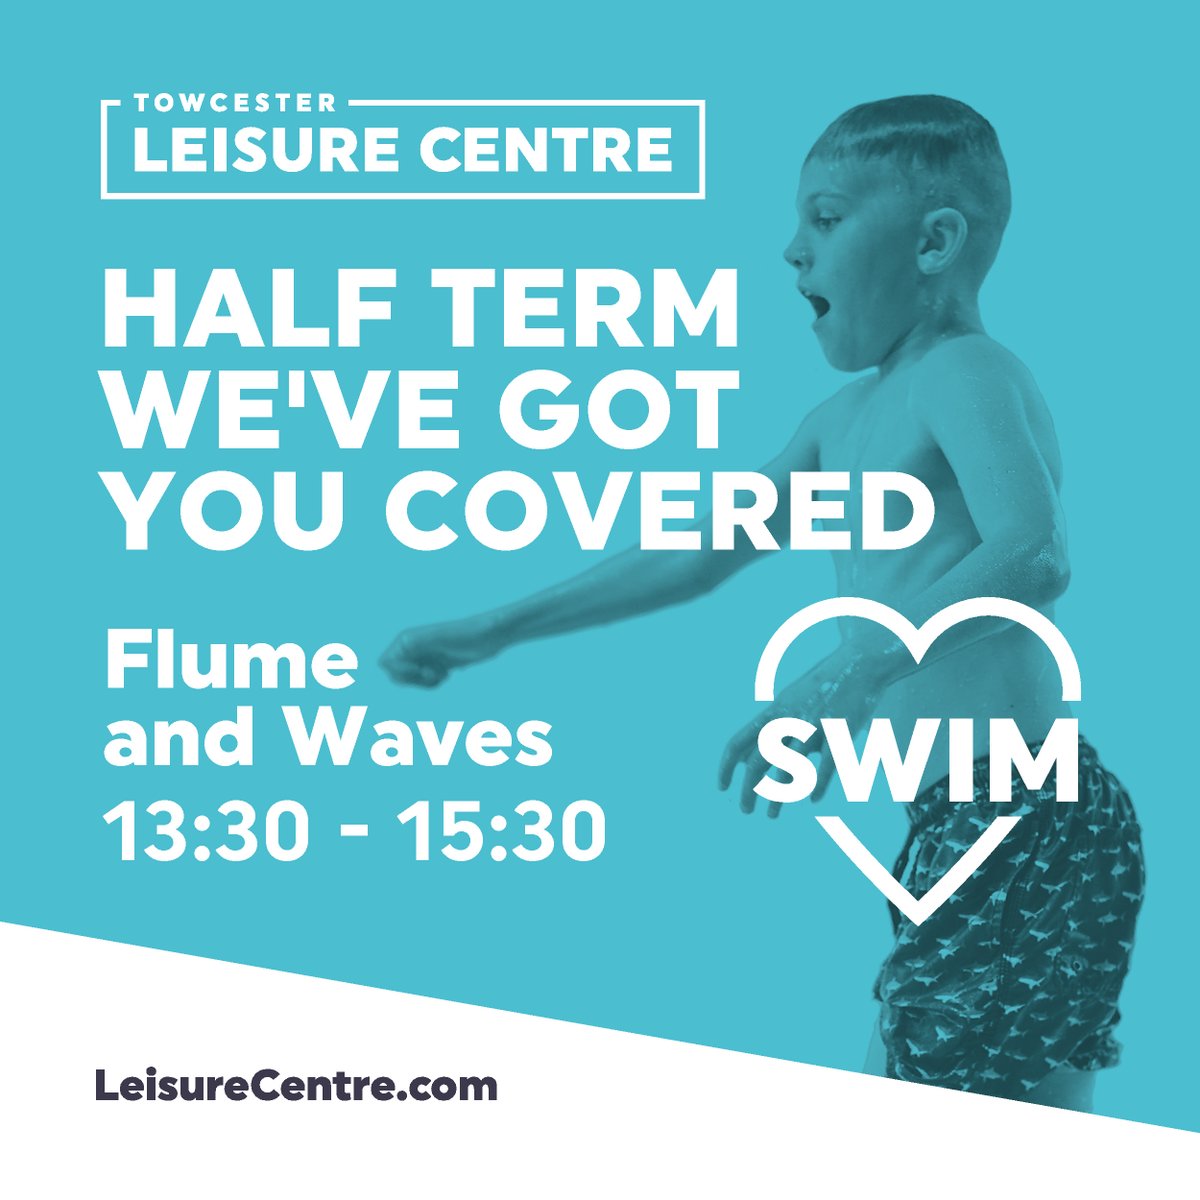 Coming swimming today? Wednesday 19th come and join us at 13.30 - 15.30 for our Flume & Waves session. #swimming #familyfun #holidayactivities #mylocal #leisurecentre